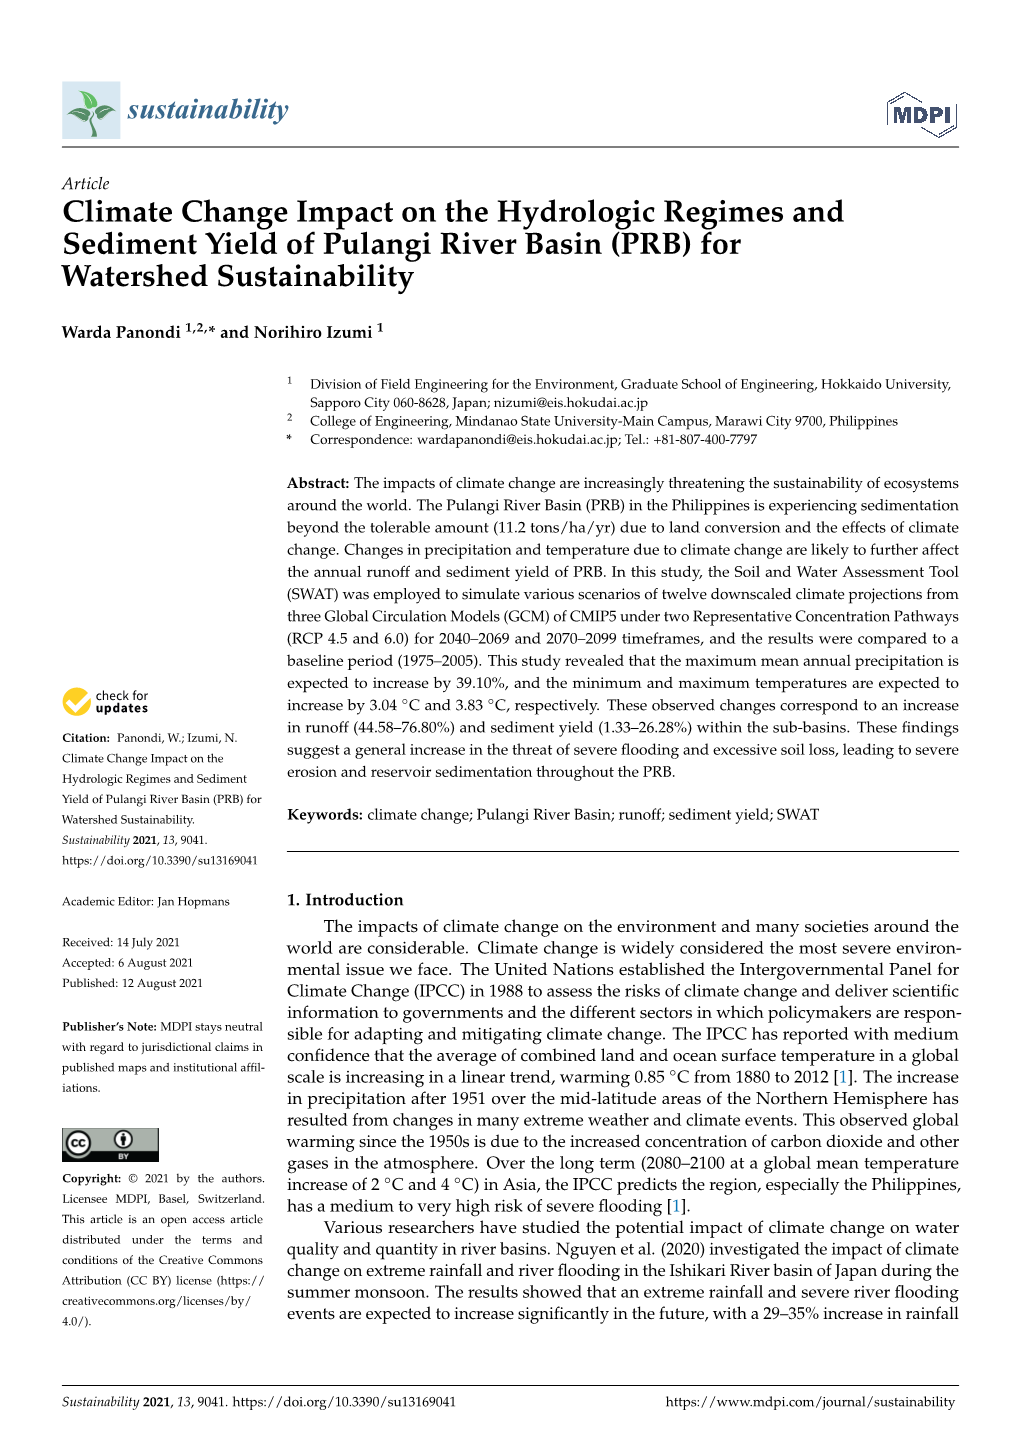 Climate Change Impact on the Hydrologic Regimes and Sediment Yield of Pulangi River Basin (PRB) for Watershed Sustainability